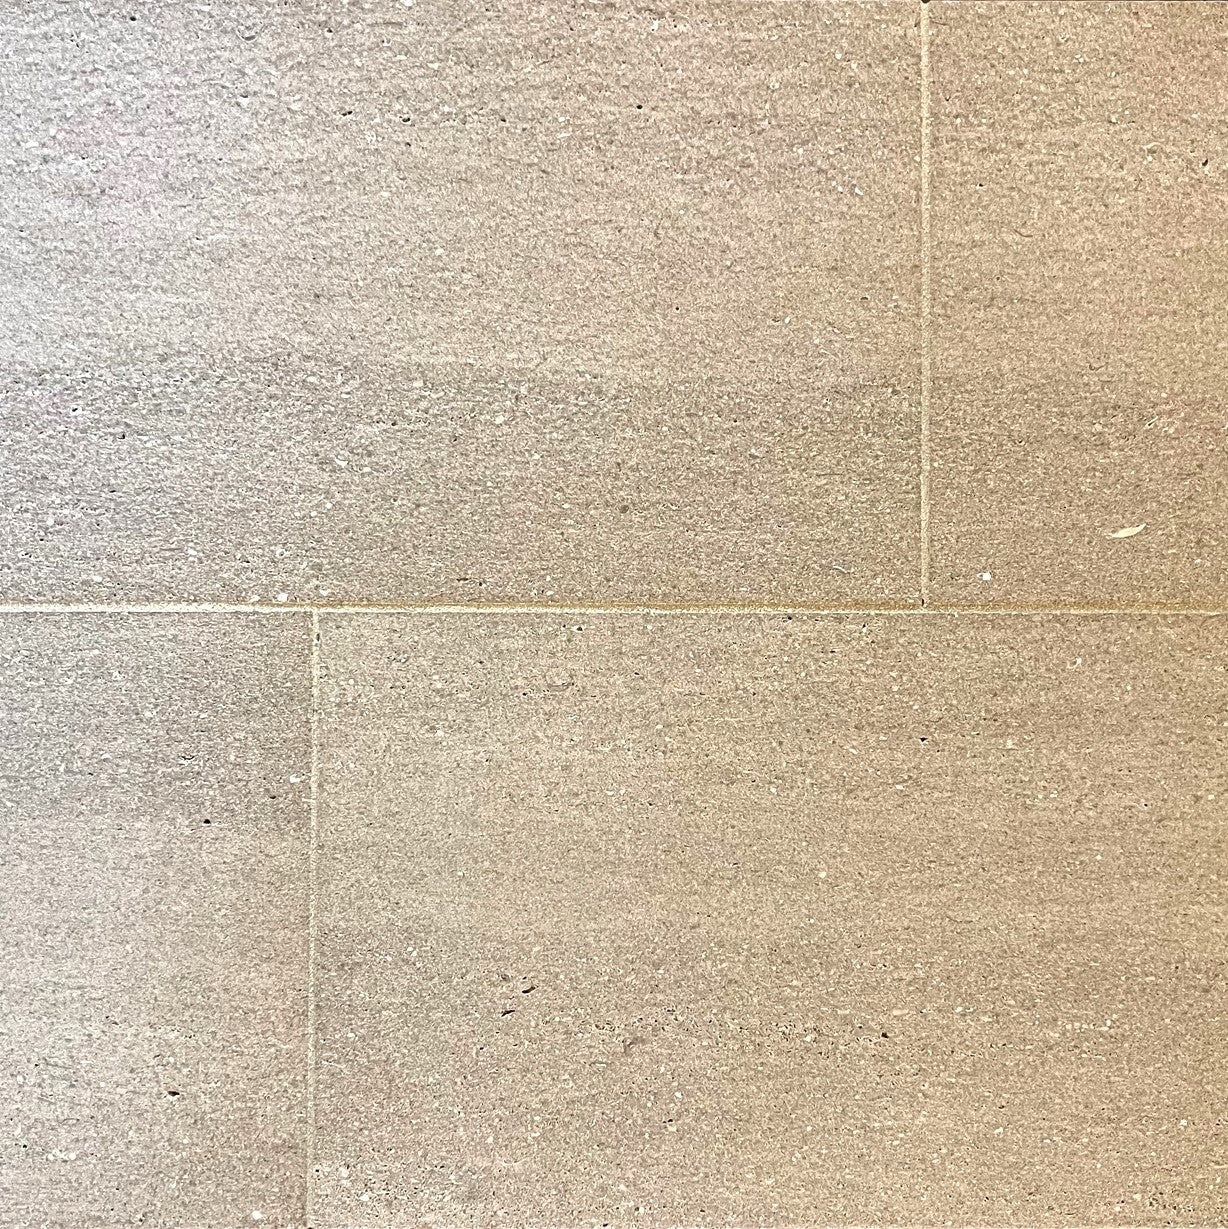 indiana limestone beige stone tile  sold by surface group